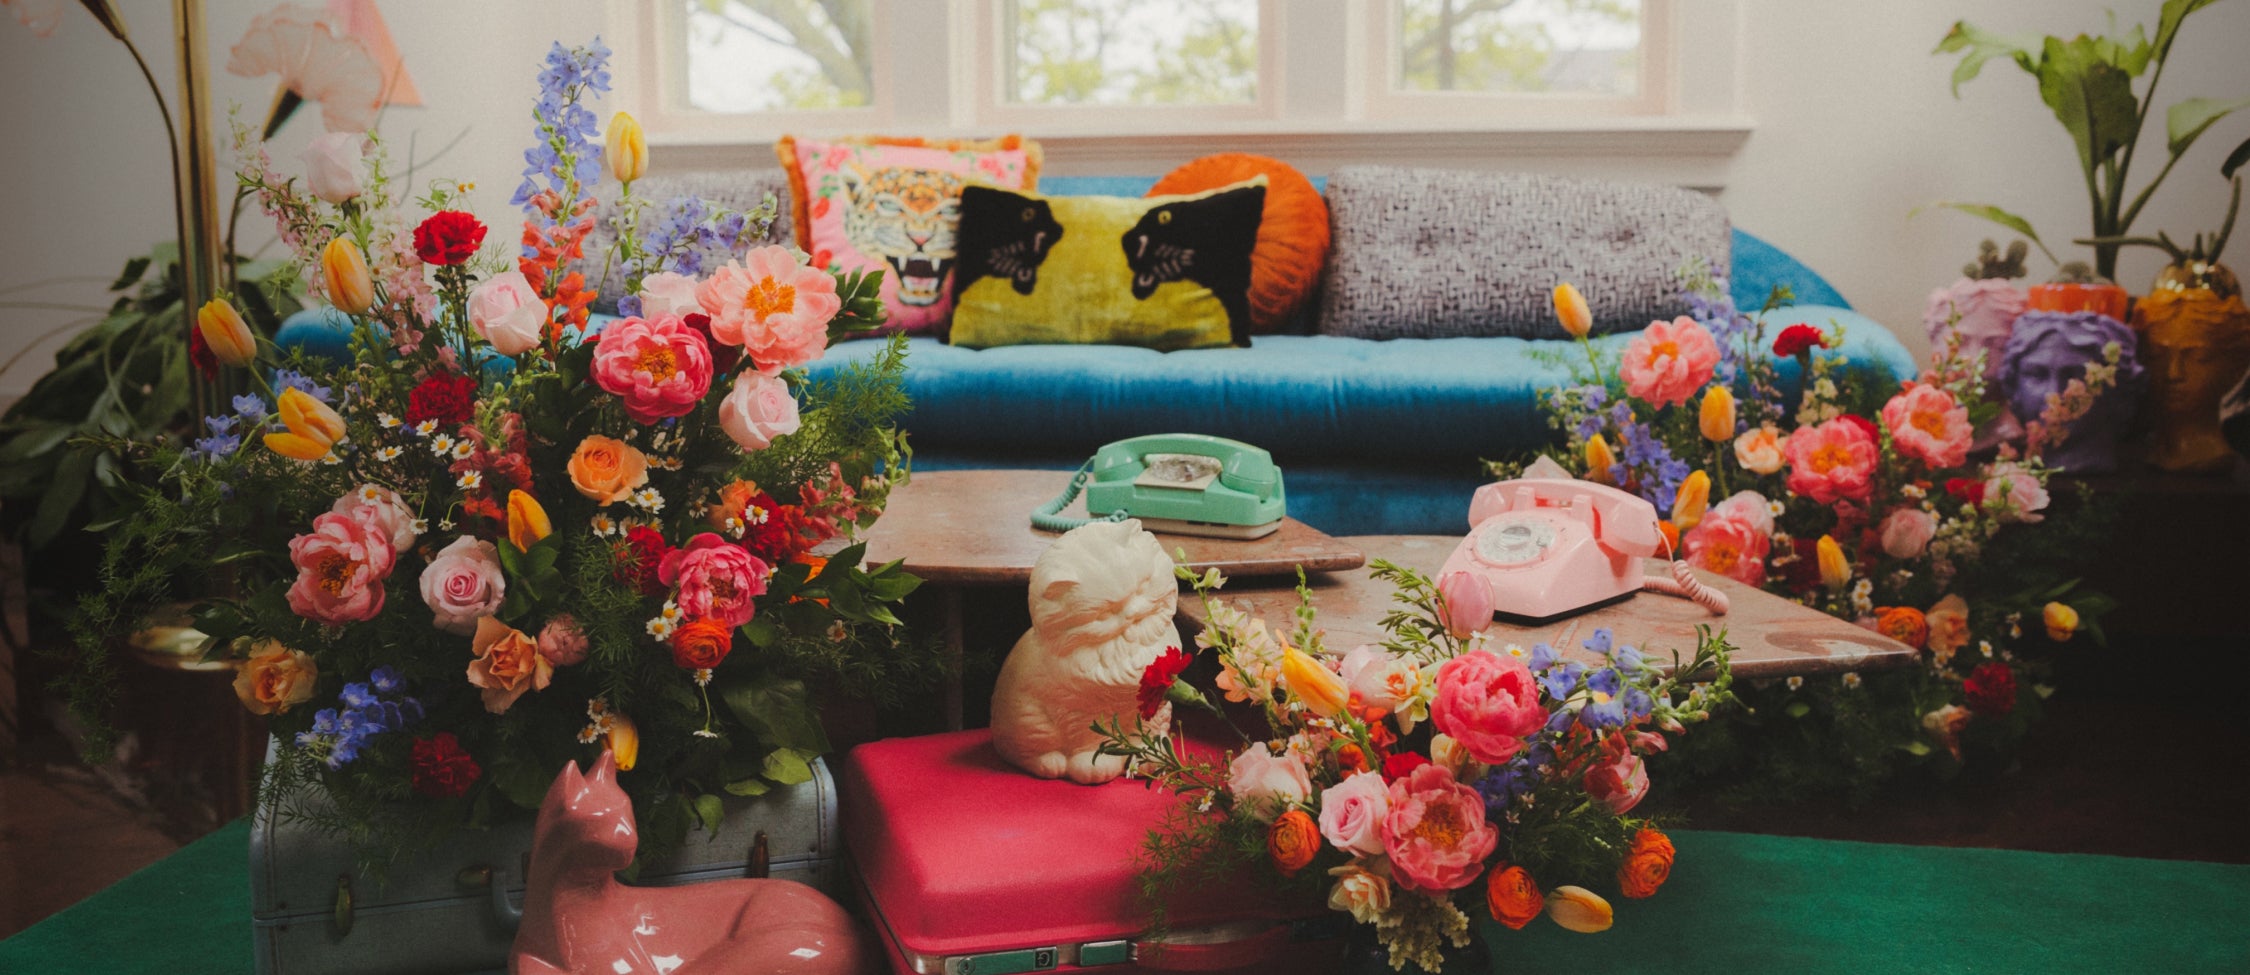 A room featuring multiple large, colorful floral arrangements and vintage decor, including pastel phones